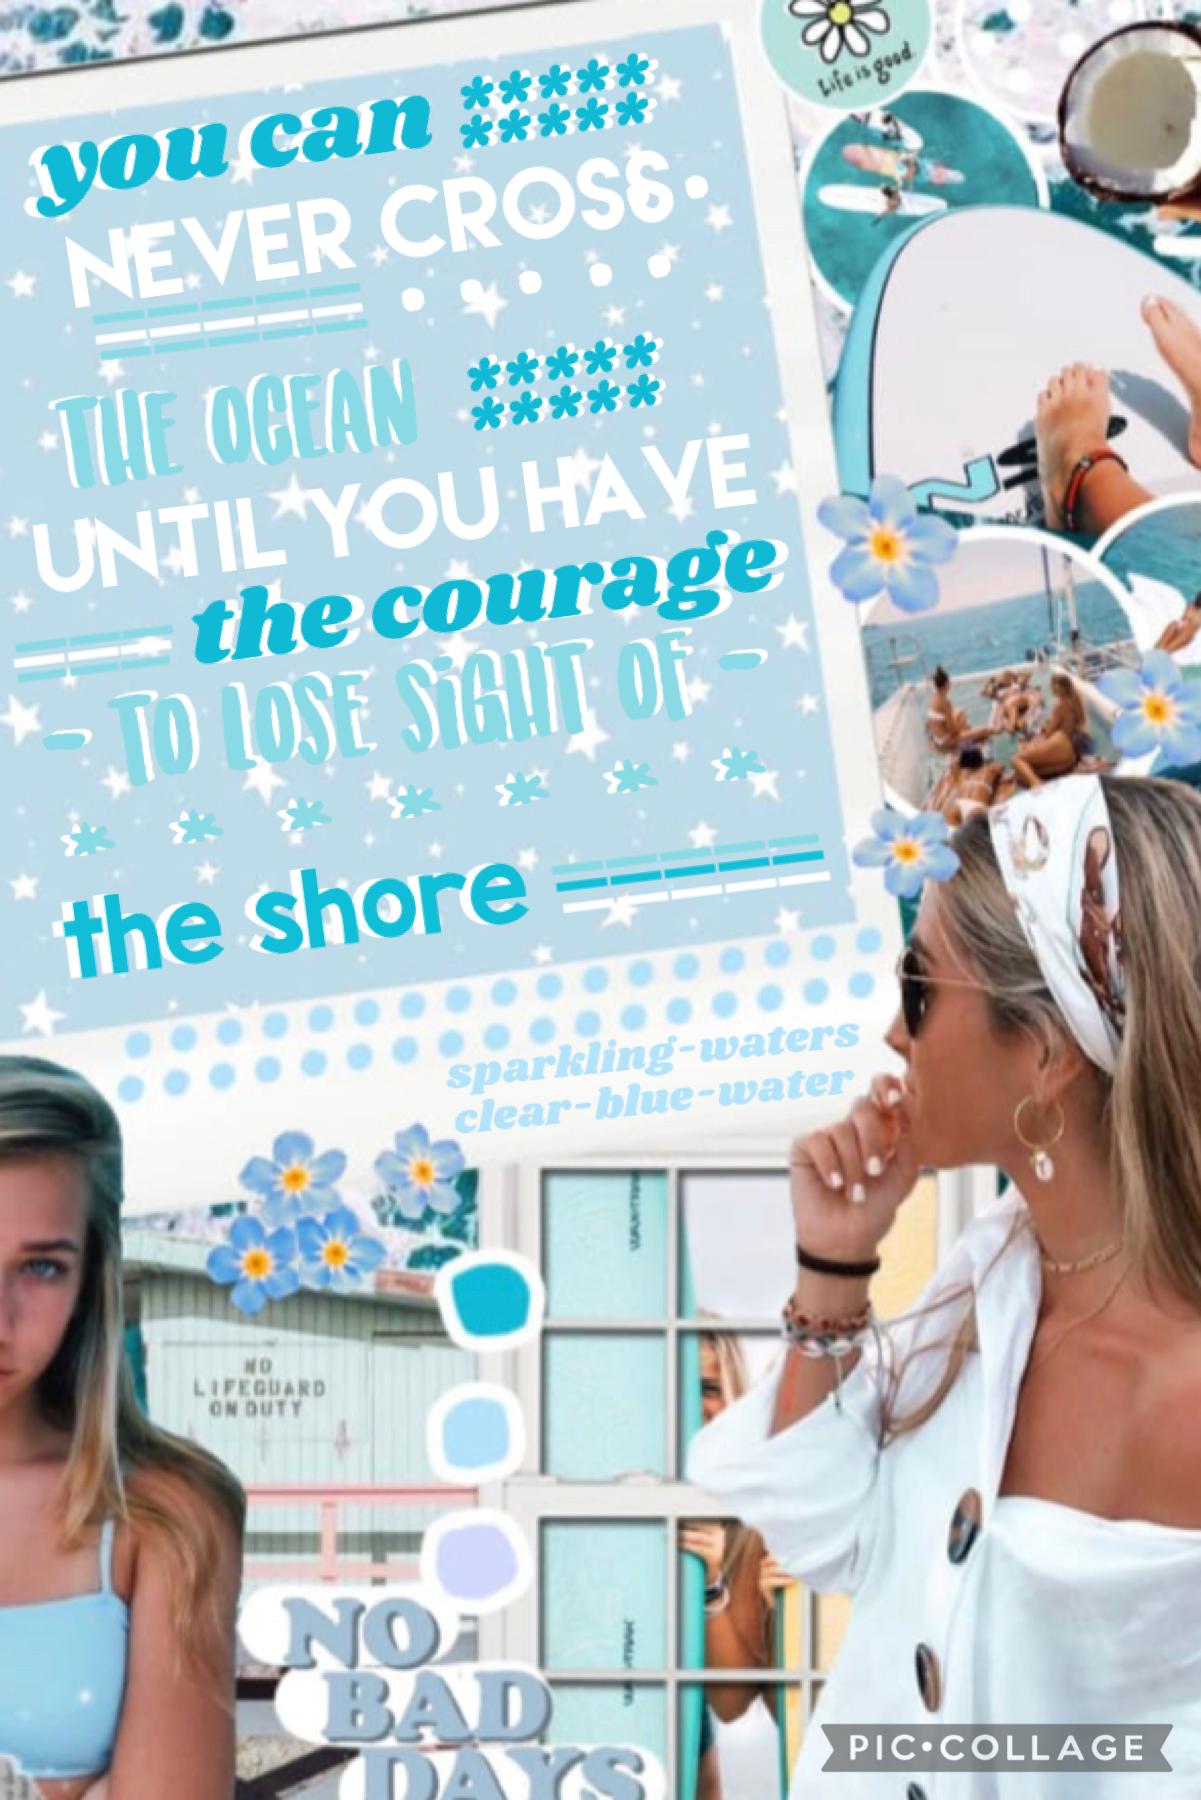 🐬 t a p 🐬
Heyy!! This is my first post! I’m Elly, and if u want to colab it be friends comment! I made the text and this bg was made by Sarah, clear-blue-water!! go follow her!! 